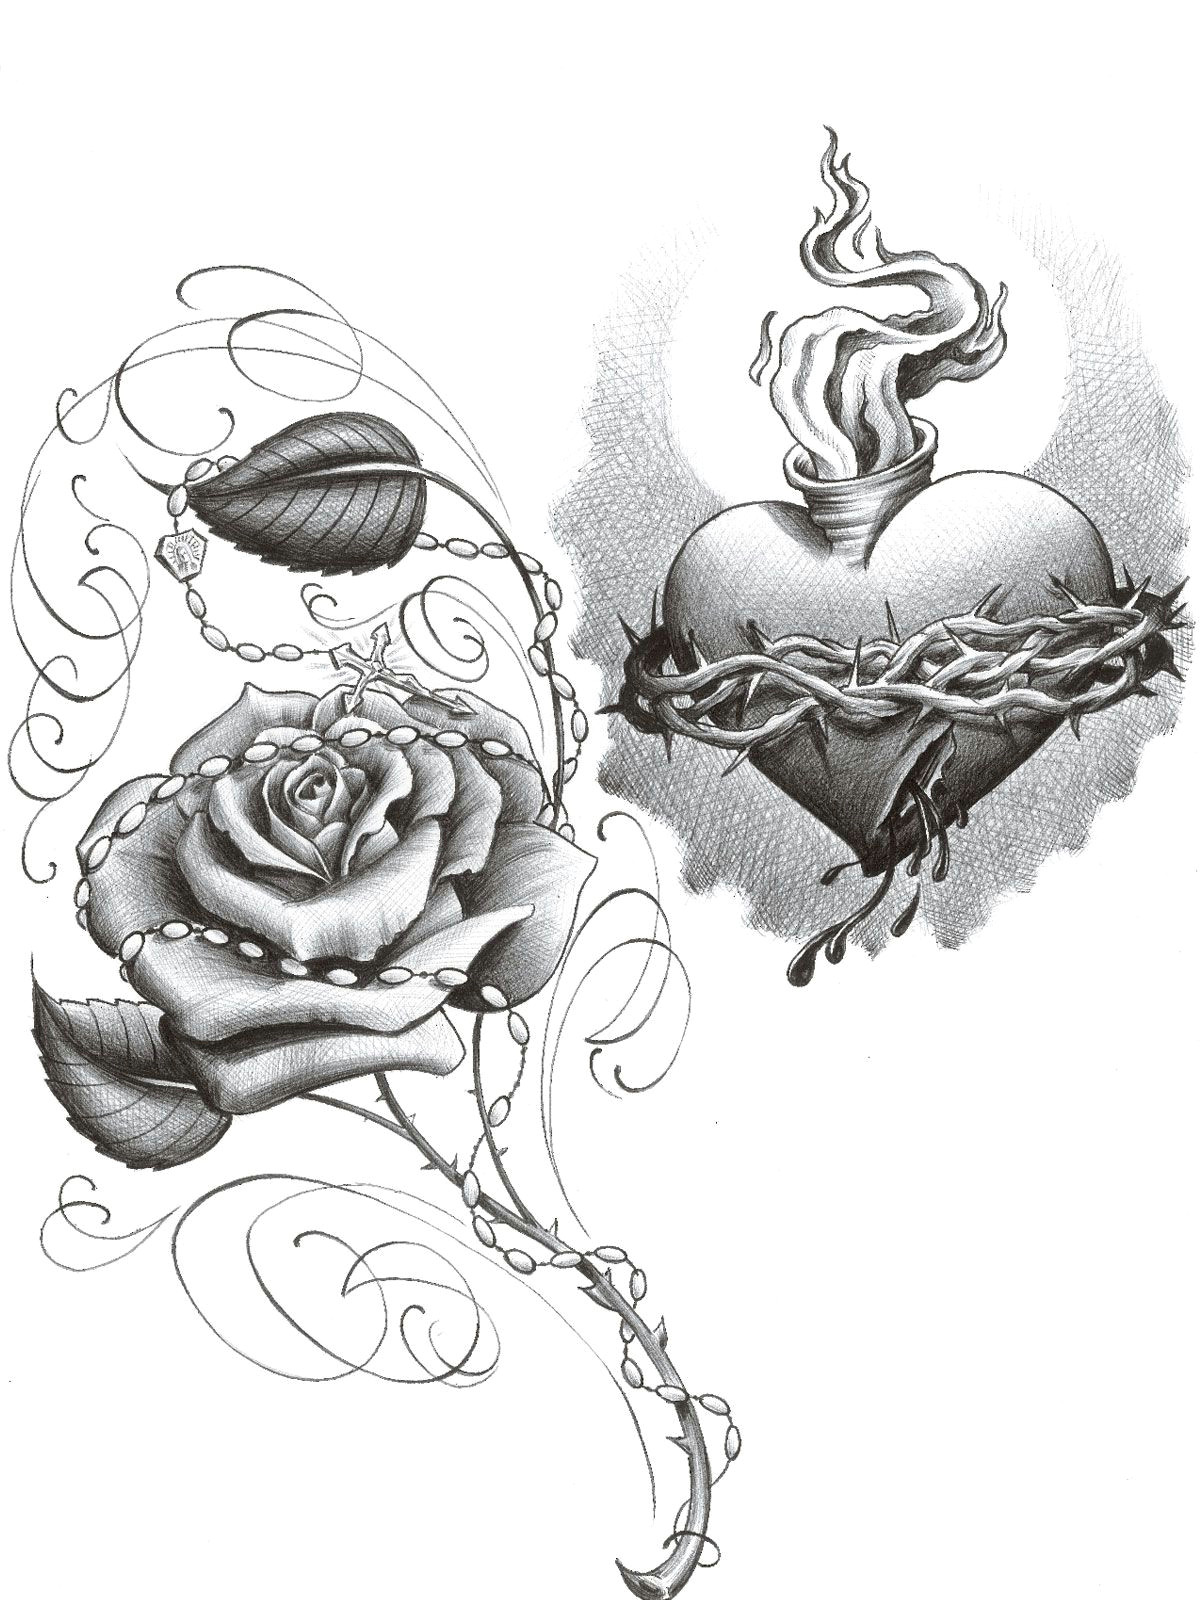 Drawings Of Roses for Tattoos Chicano Art Drawings Roses Chicano Rose Thugs Chica Tat by 2face